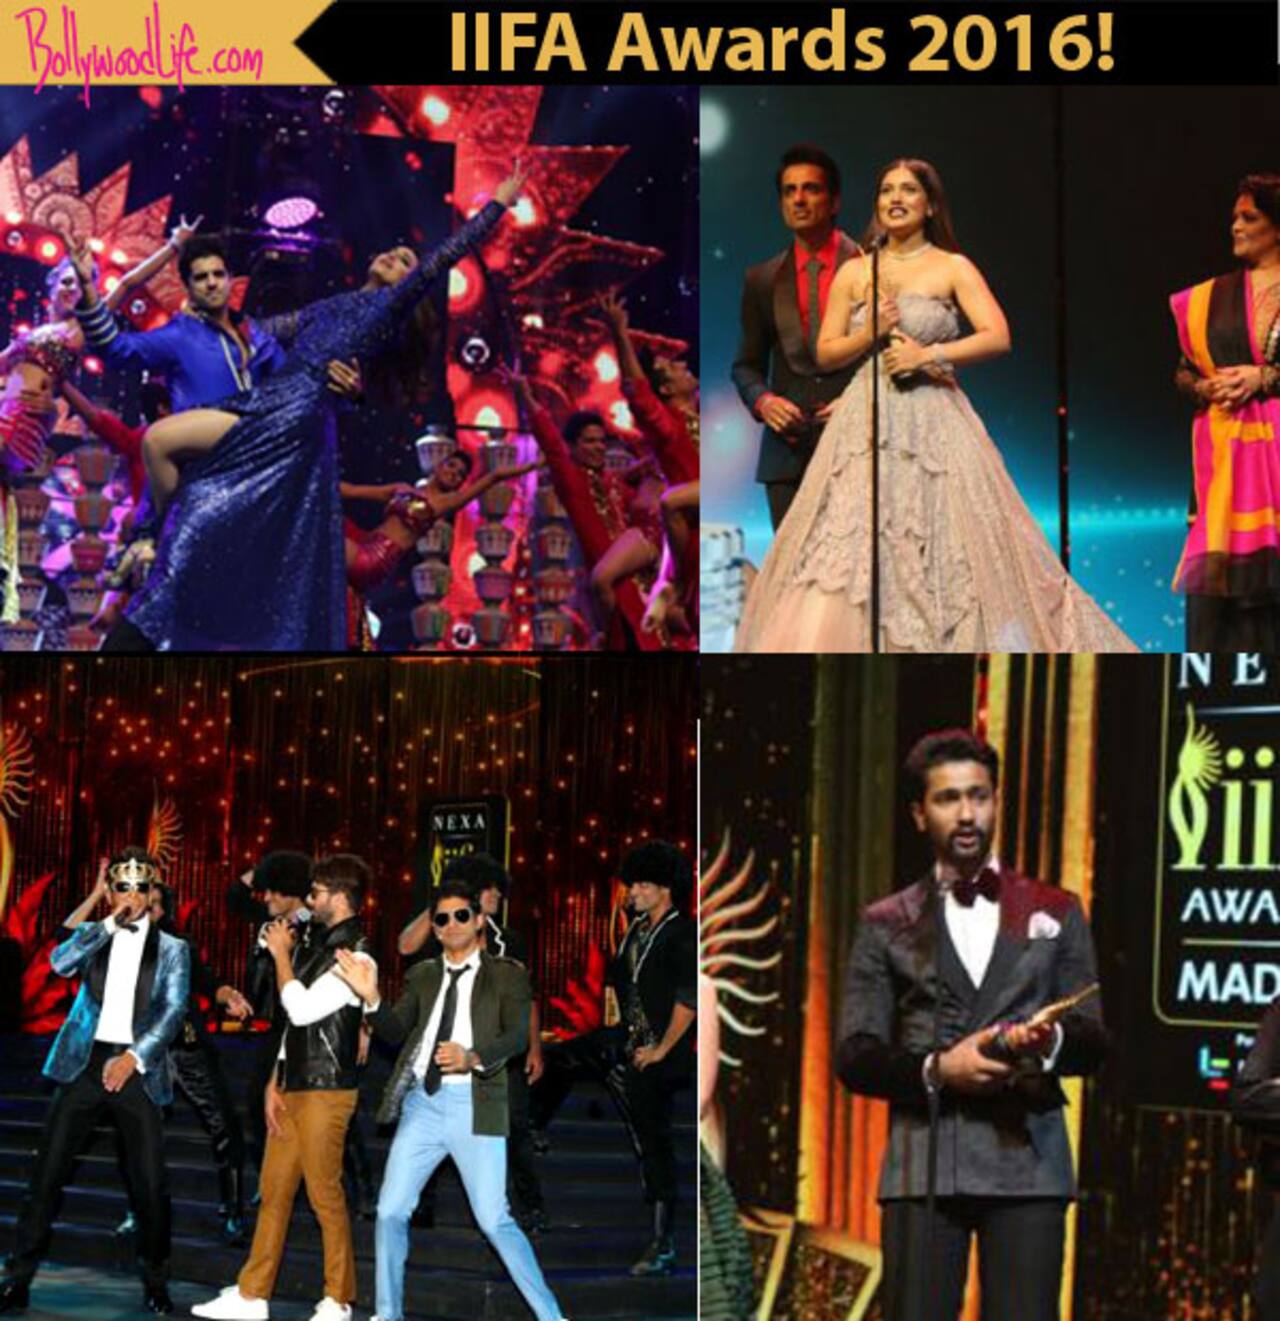 IIFA 2016 Live Updates: Sonakshi Sinha's tribute to Sridevi; Farhan Akhtar - Shahid Kapoor's musical face - off and the Best Debut Awards